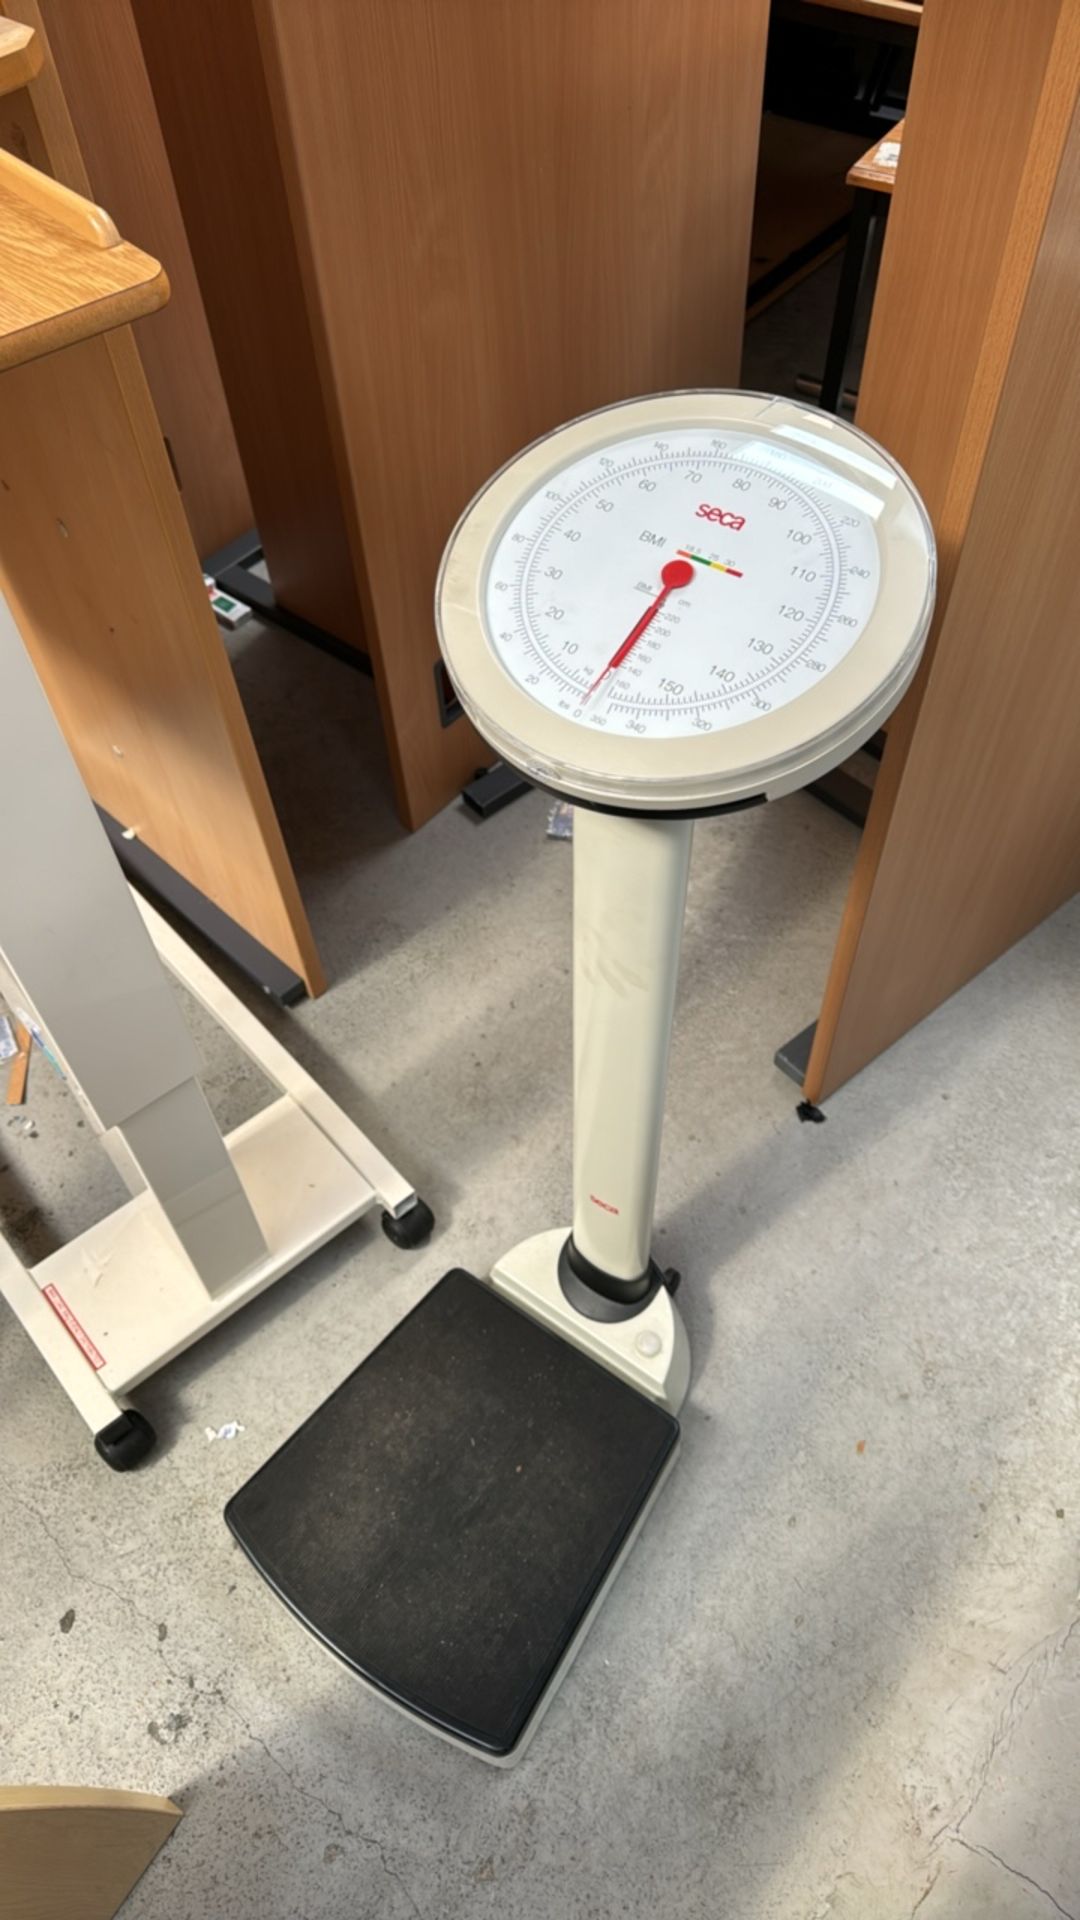 Seca Weighing Scales - Image 3 of 3